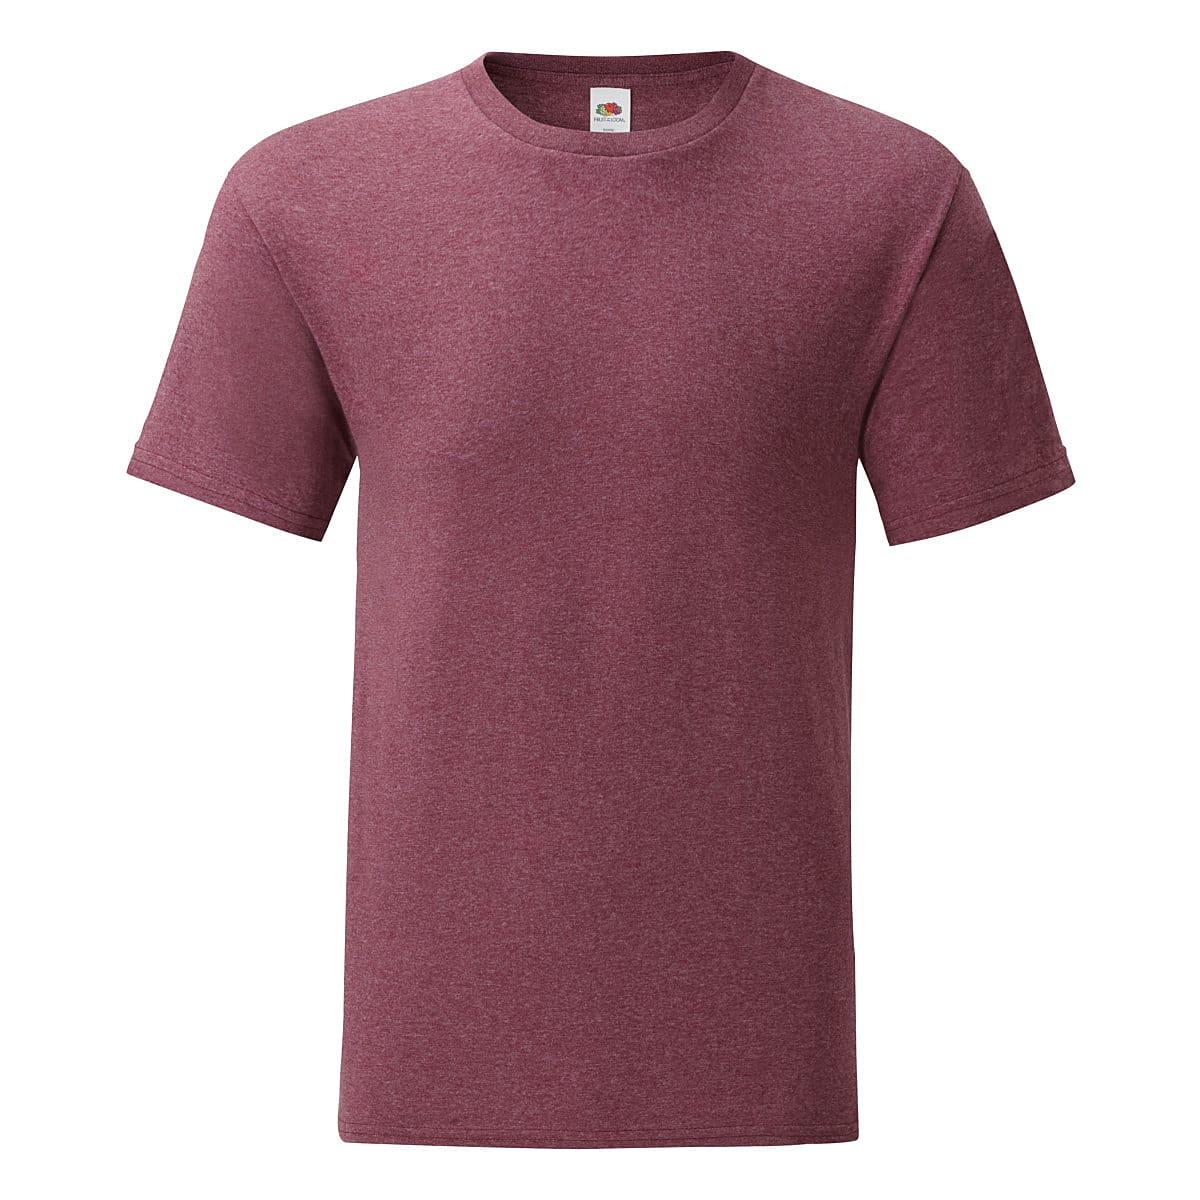 Fruit Of The Loom Mens Iconic T-Shirt in Heather Burgundy (Product Code: 61430)